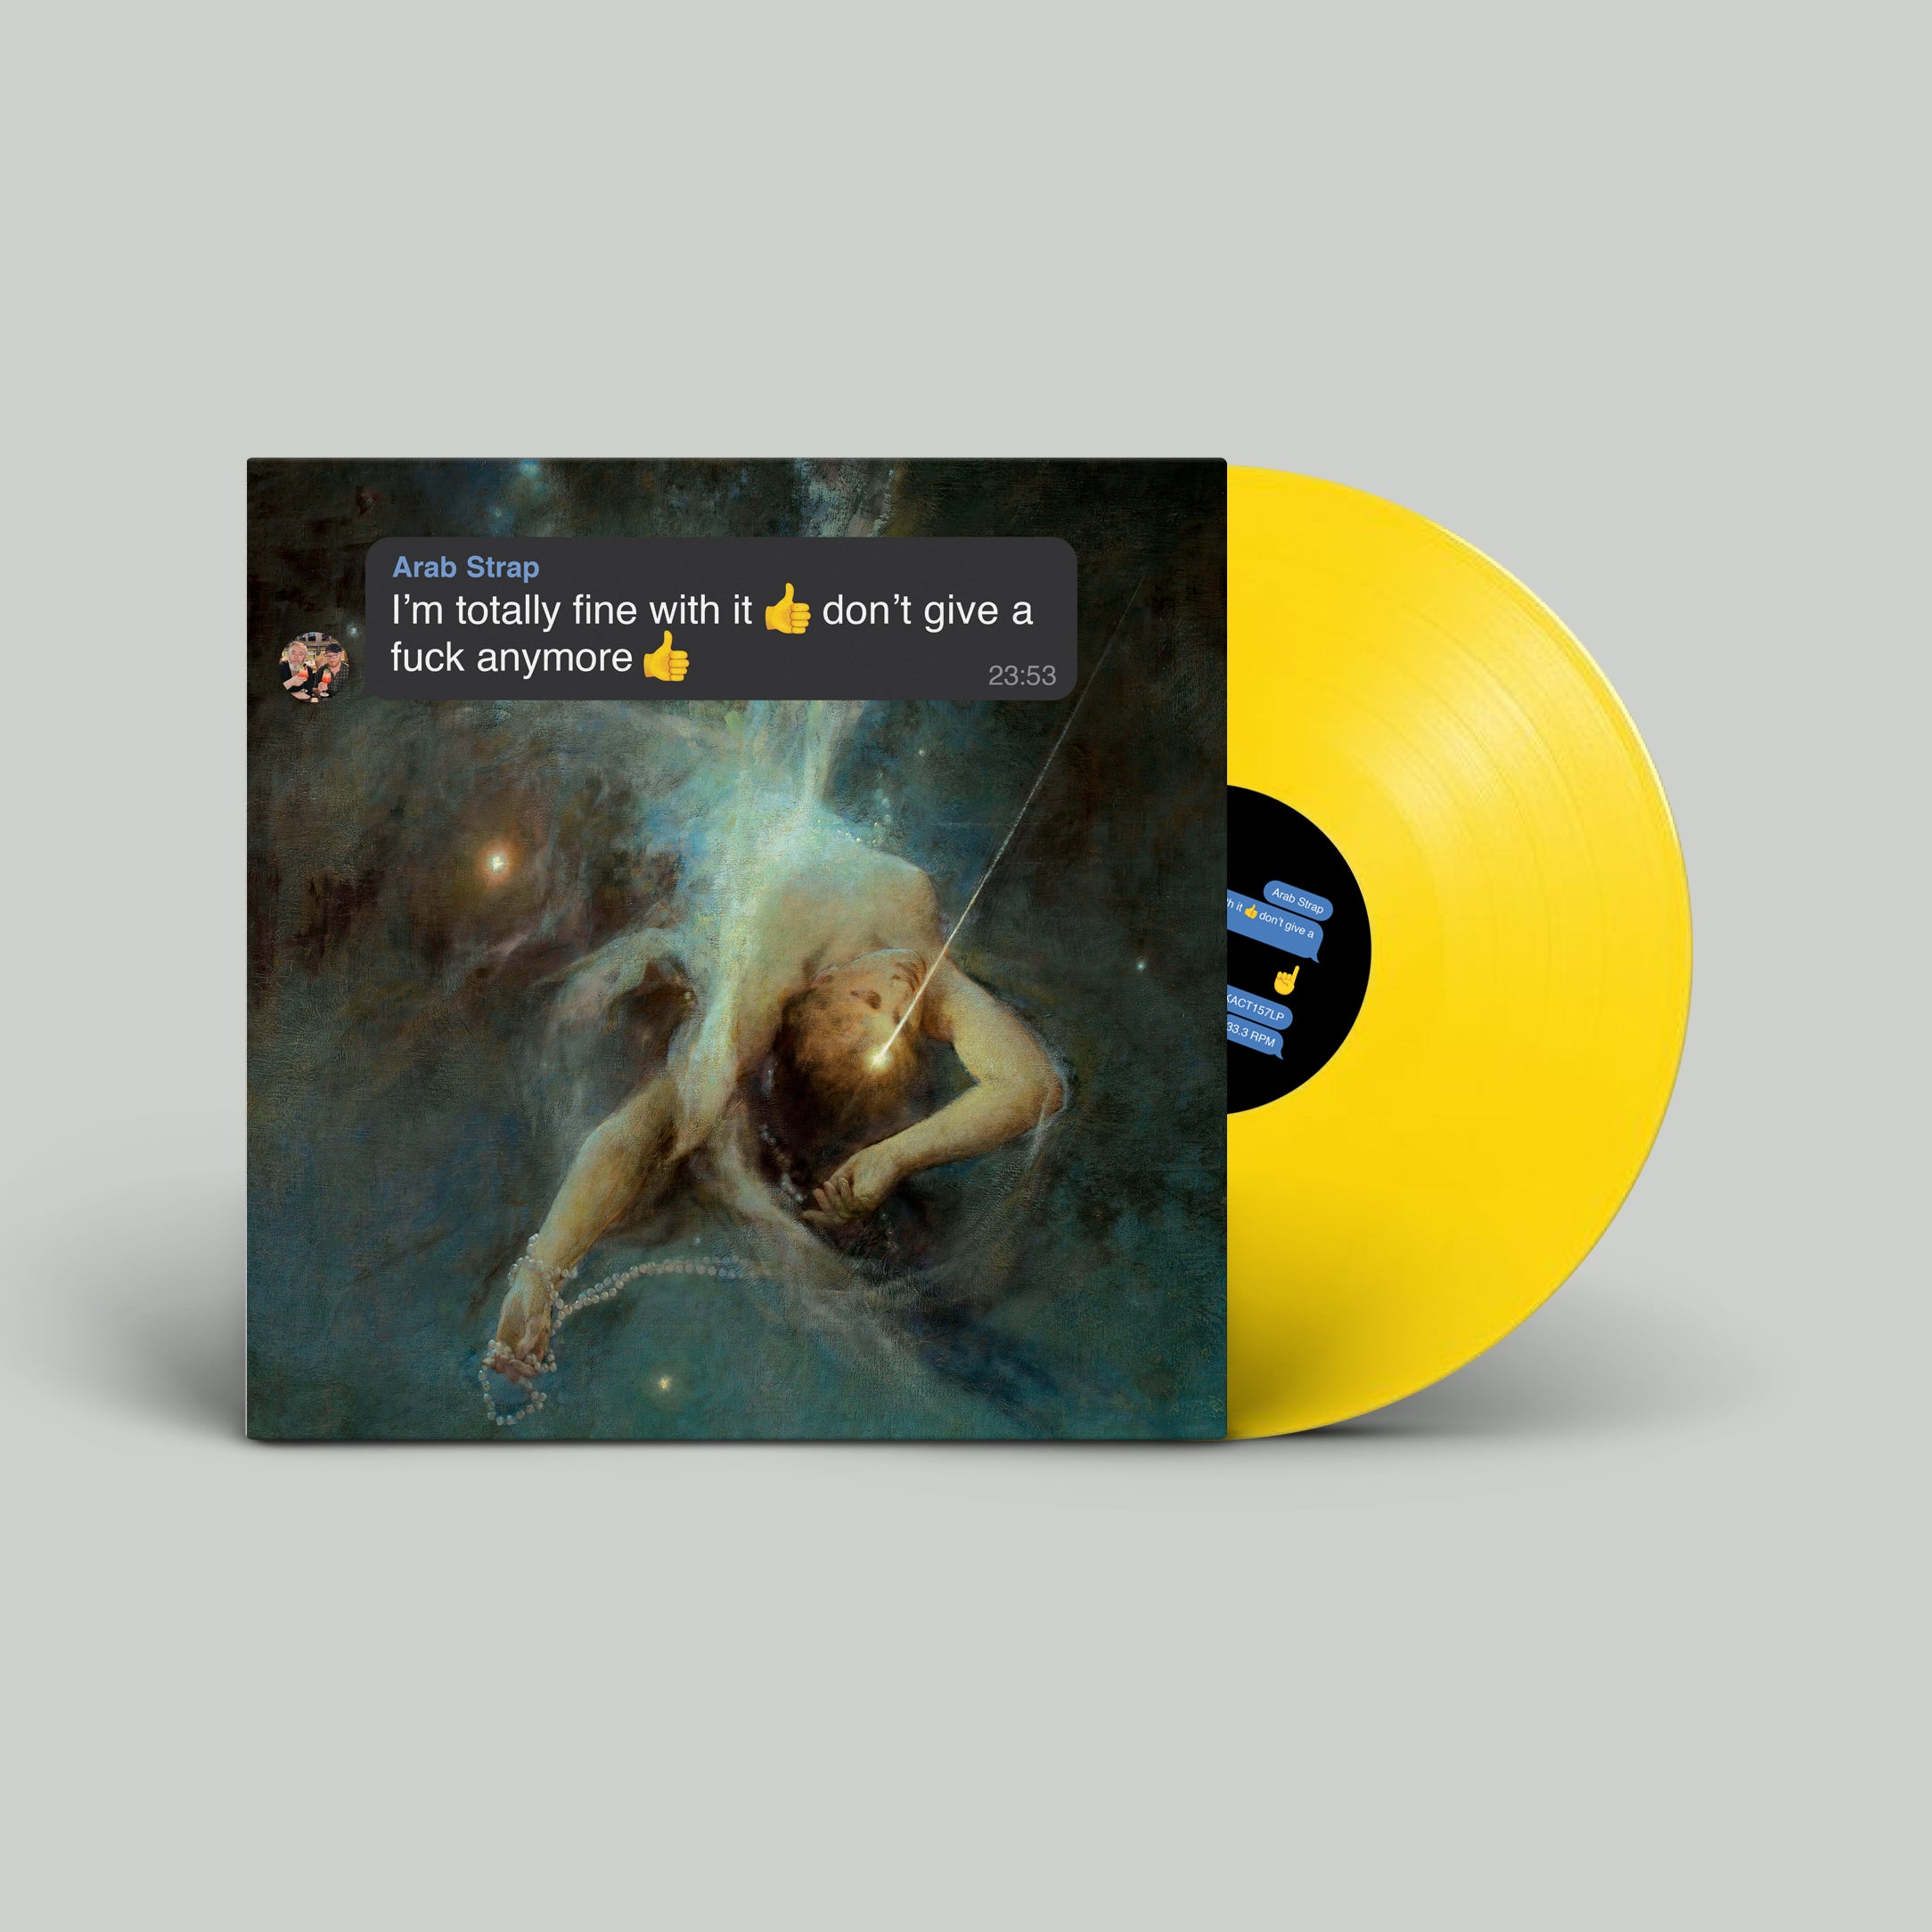 Arab Strap - I’m totally fine with it 👍don’t give a fuck anymore 👍: Limited 'Emoji Yellow' Vinyl LP